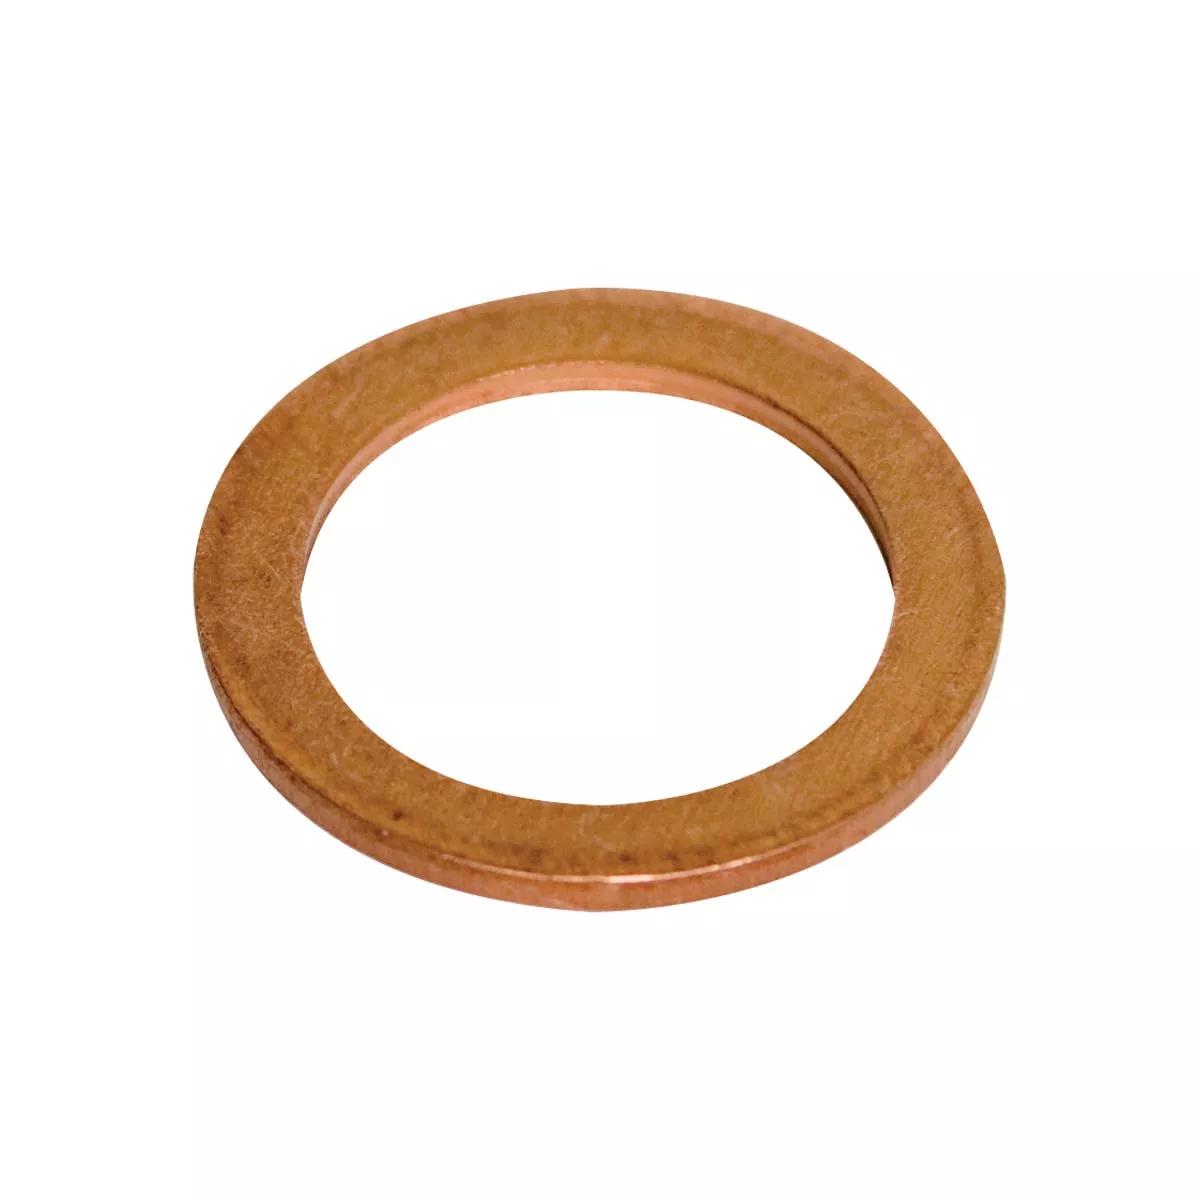 8mm x 14mm Copper Sealing Washer